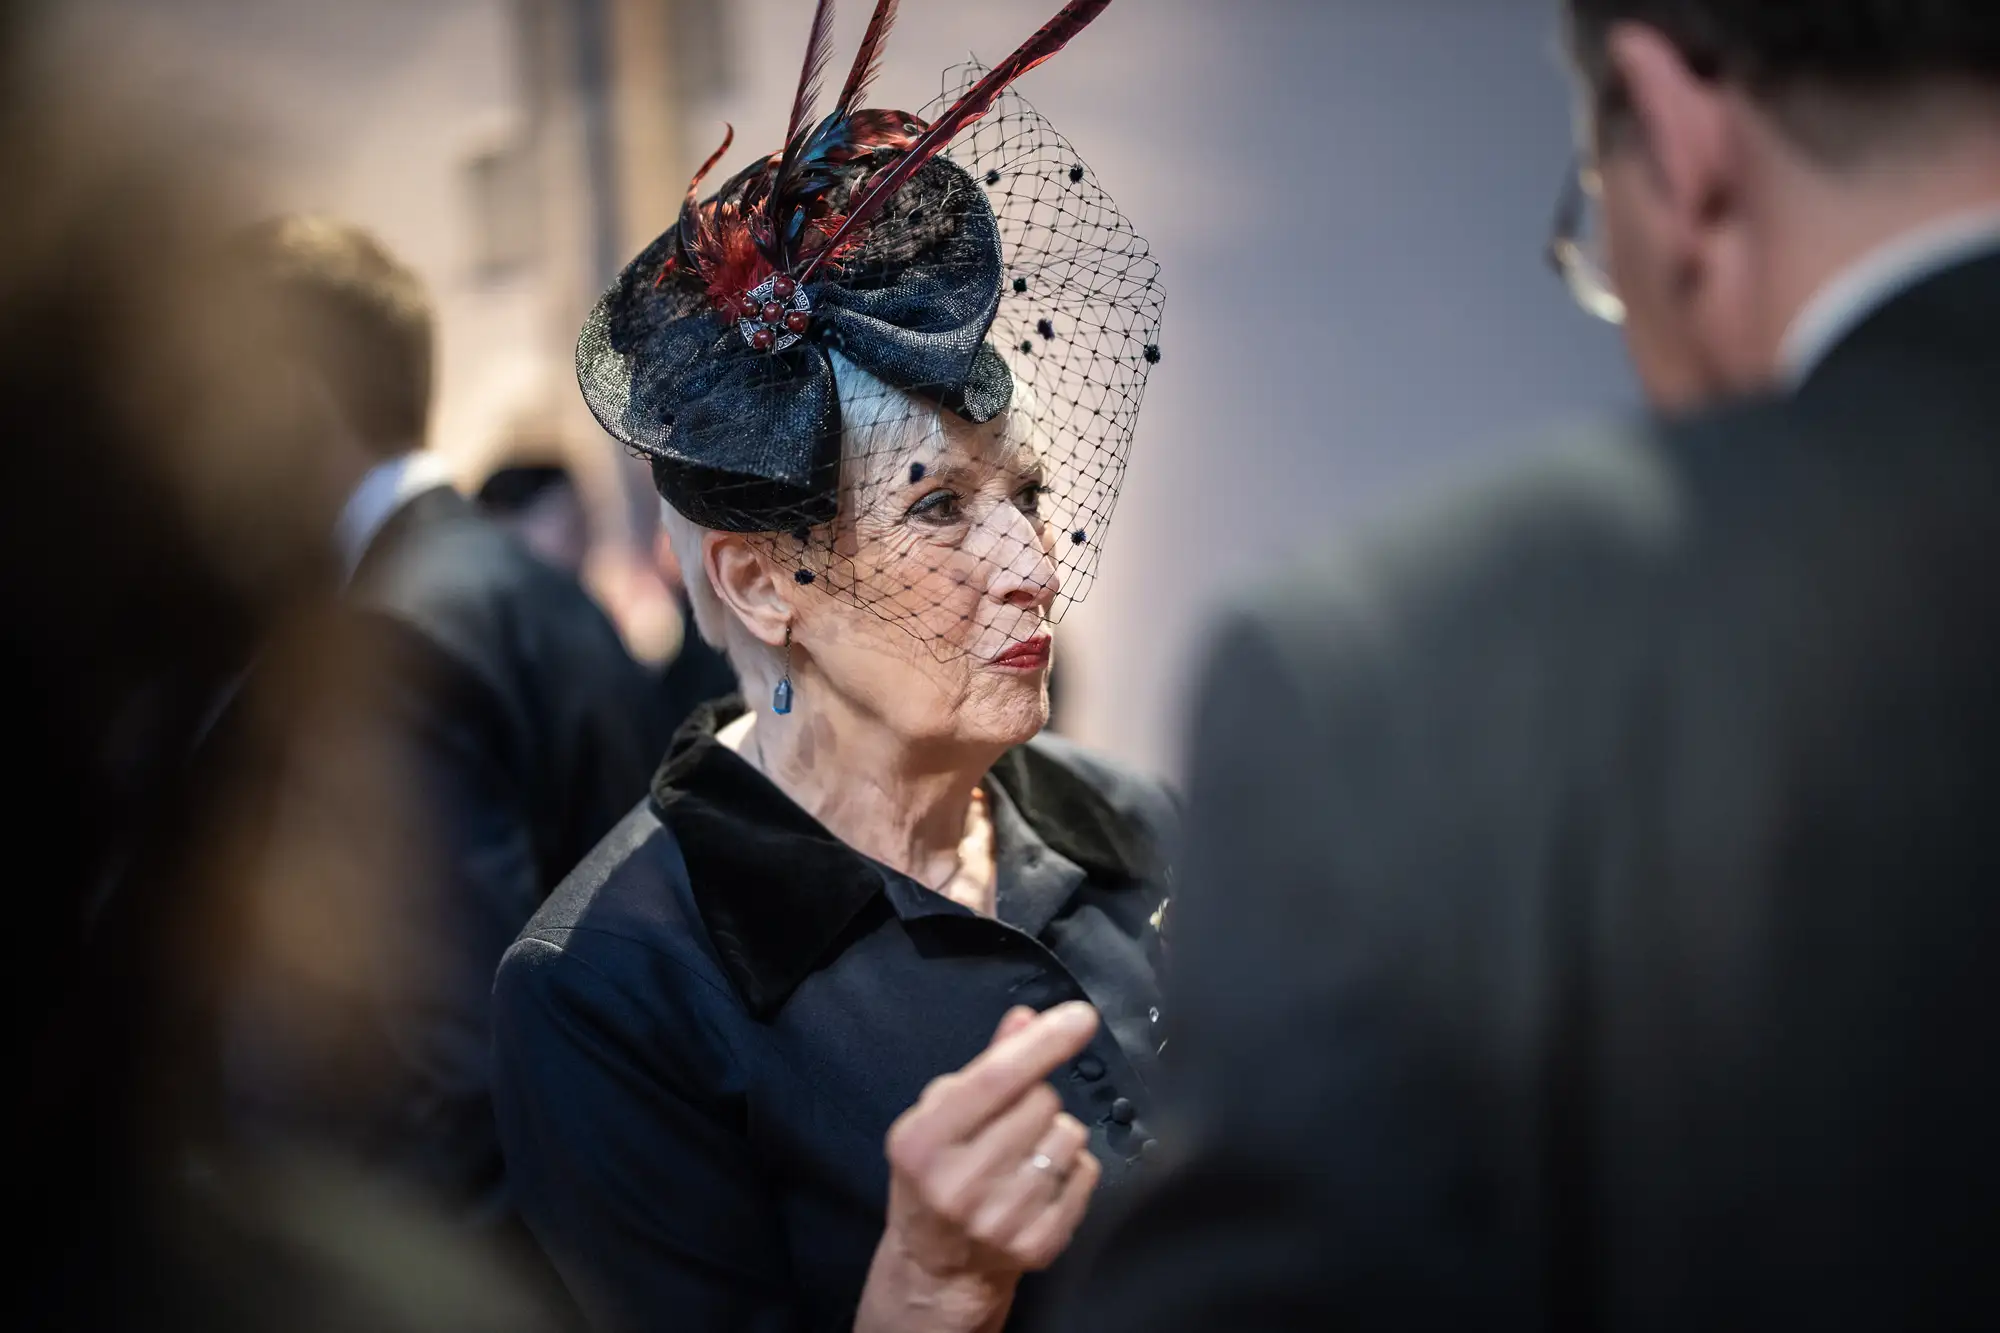 Elderly woman in a stylish hat with a net, engaged in conversation at a social event.